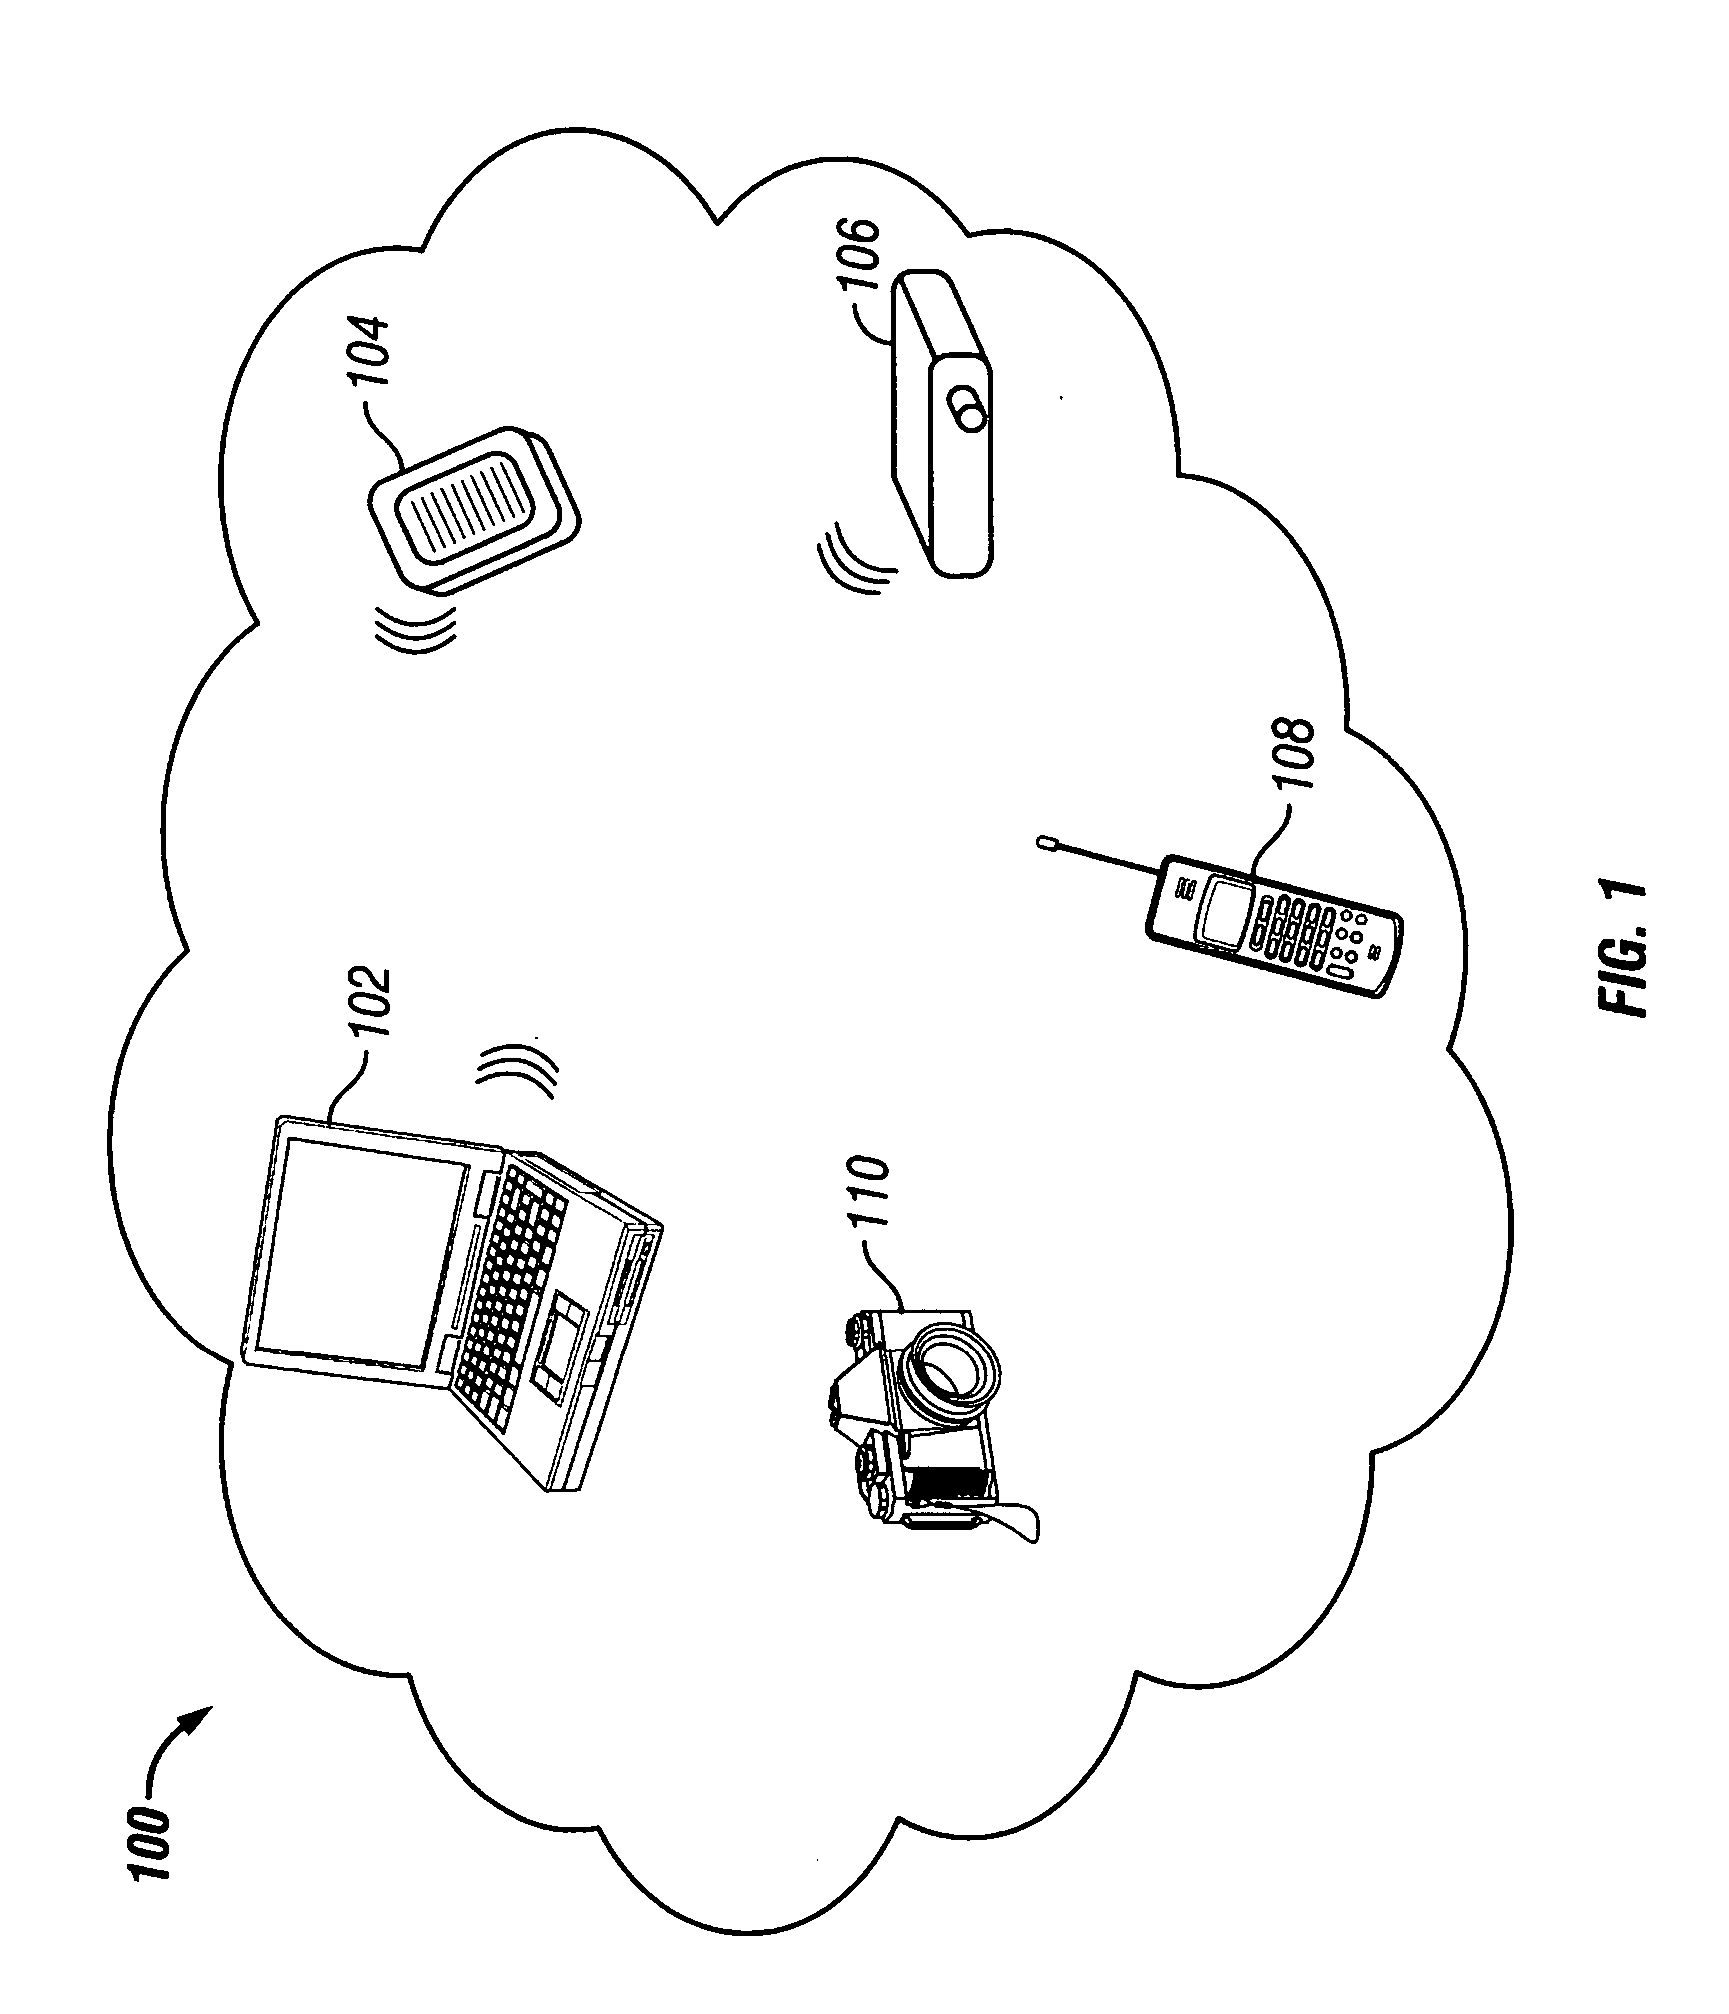 Offset beacon for distributed management and control of wireless networks